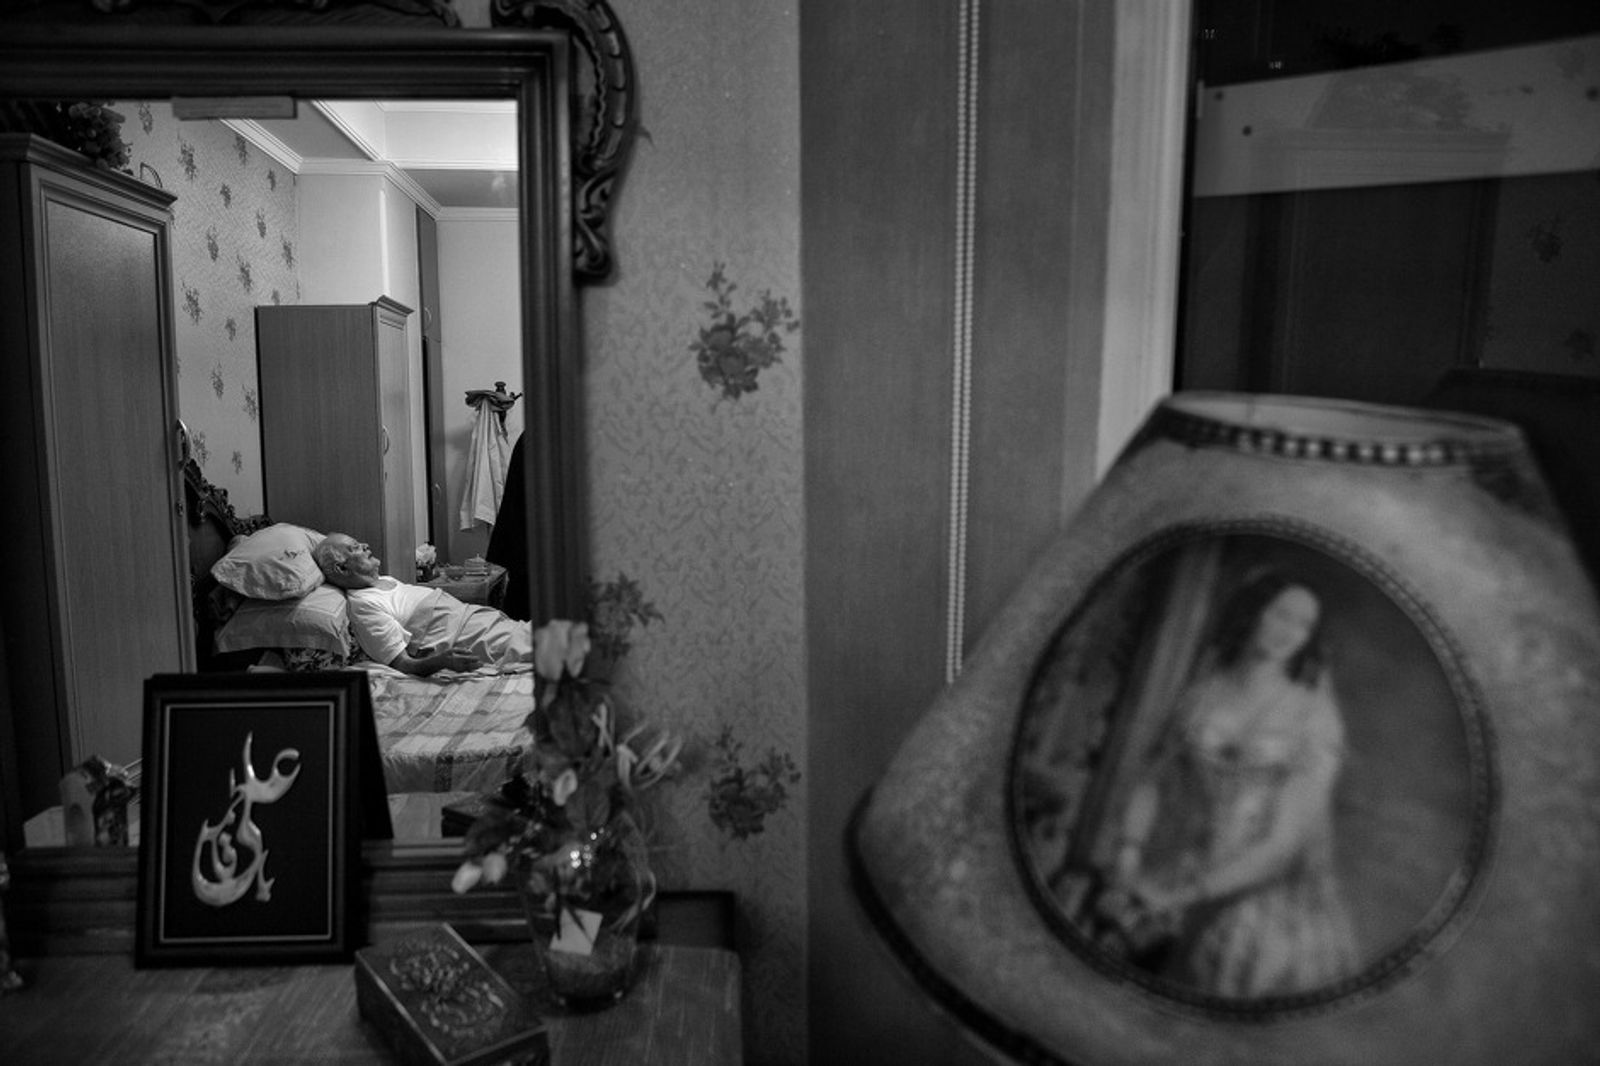 © Jalal Shams Azaran - Father is sleeping in the mirror. There is Imam Ali’s name the Muslims’ Imam in the frame.